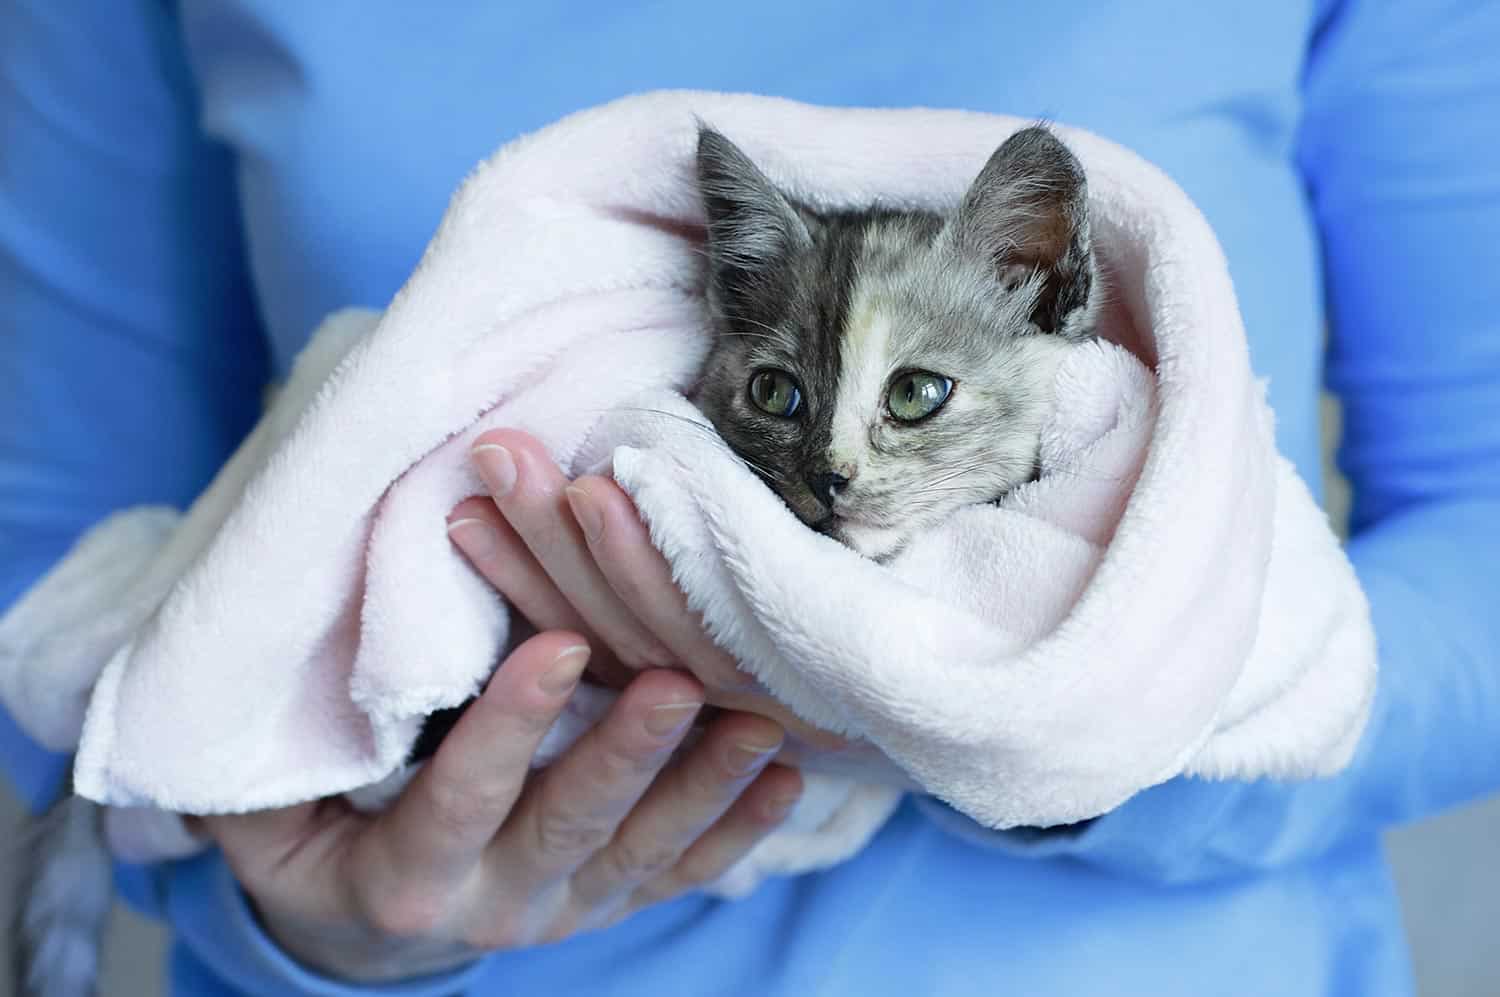 Gray kitten wrapped in a towel on the hands - for an article on how to remove clumping litter from cat's paws